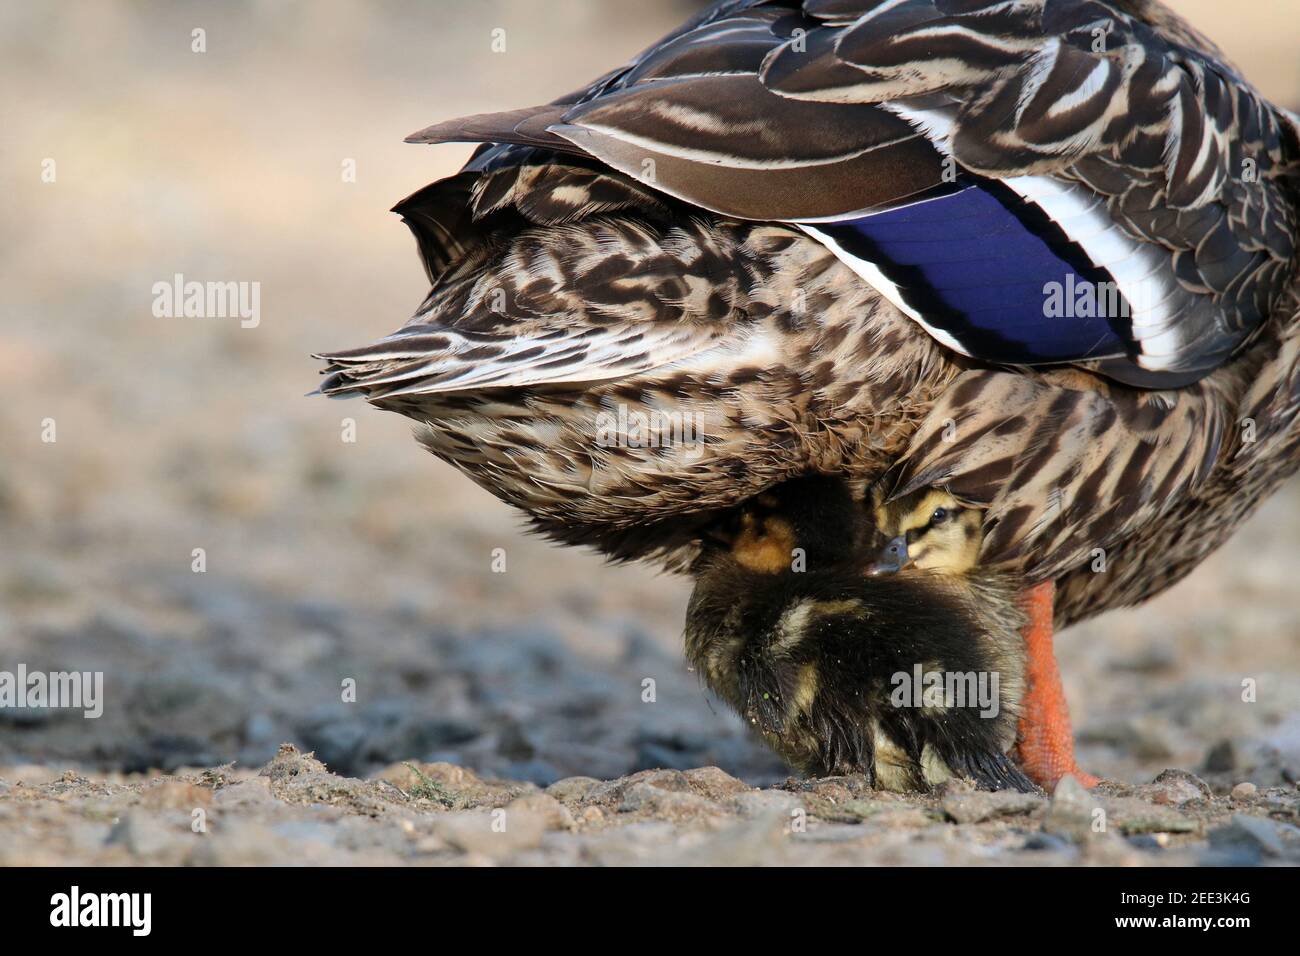 A mother duck sheltering her ducklings under her tail feathers.  The ducklings are staying safe and warm. Stock Photo